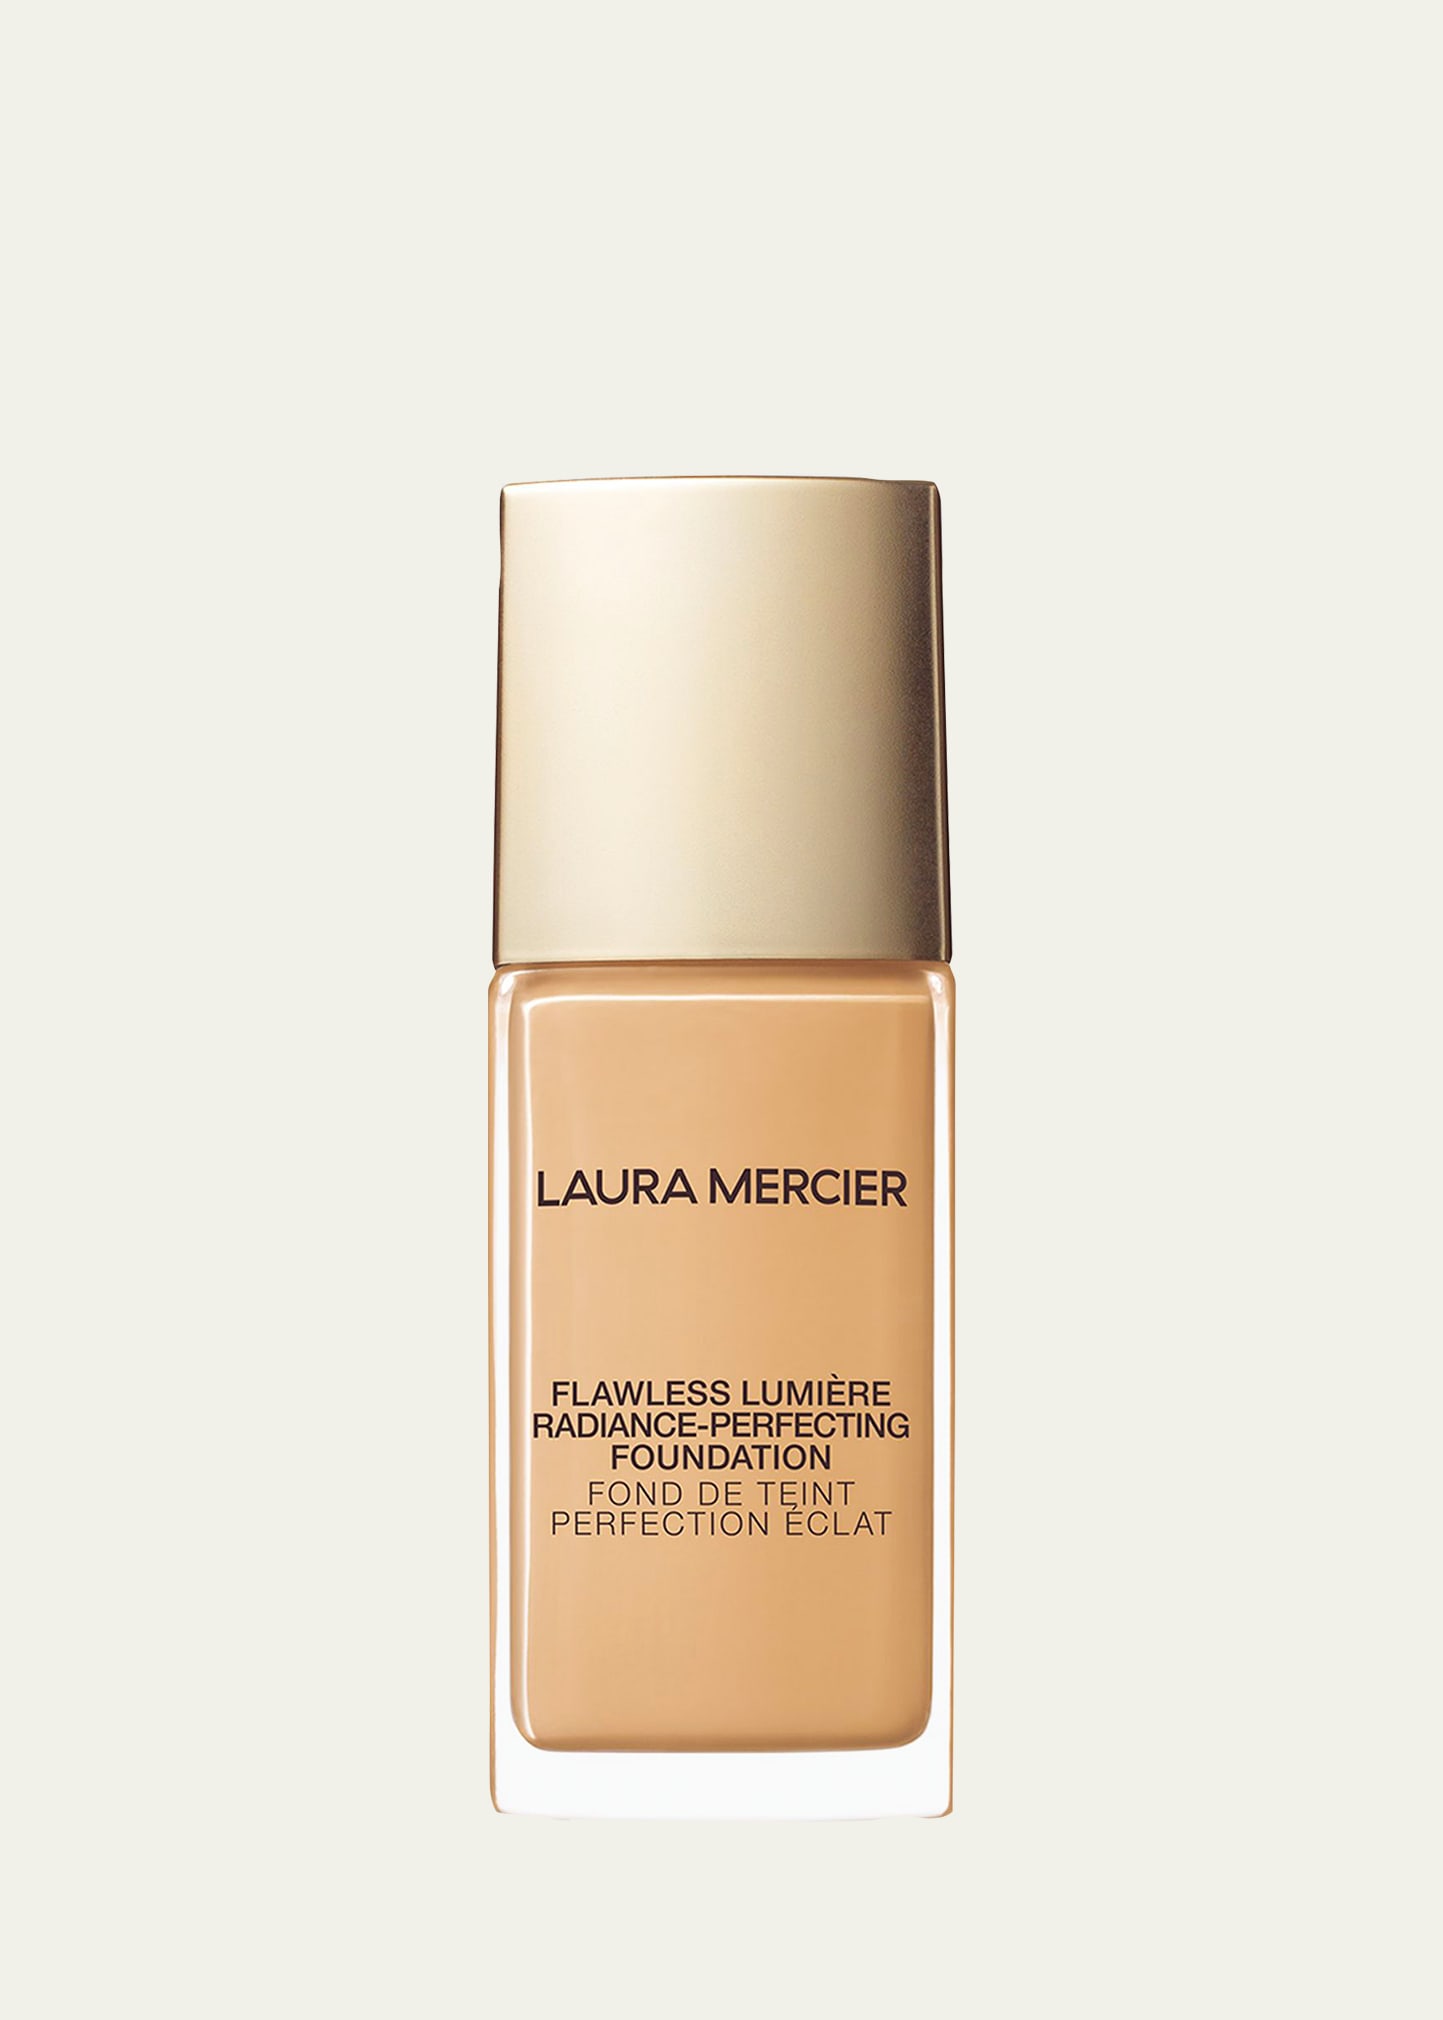 Flawless Lumi&#232re Radiance-Perfecting Foundation